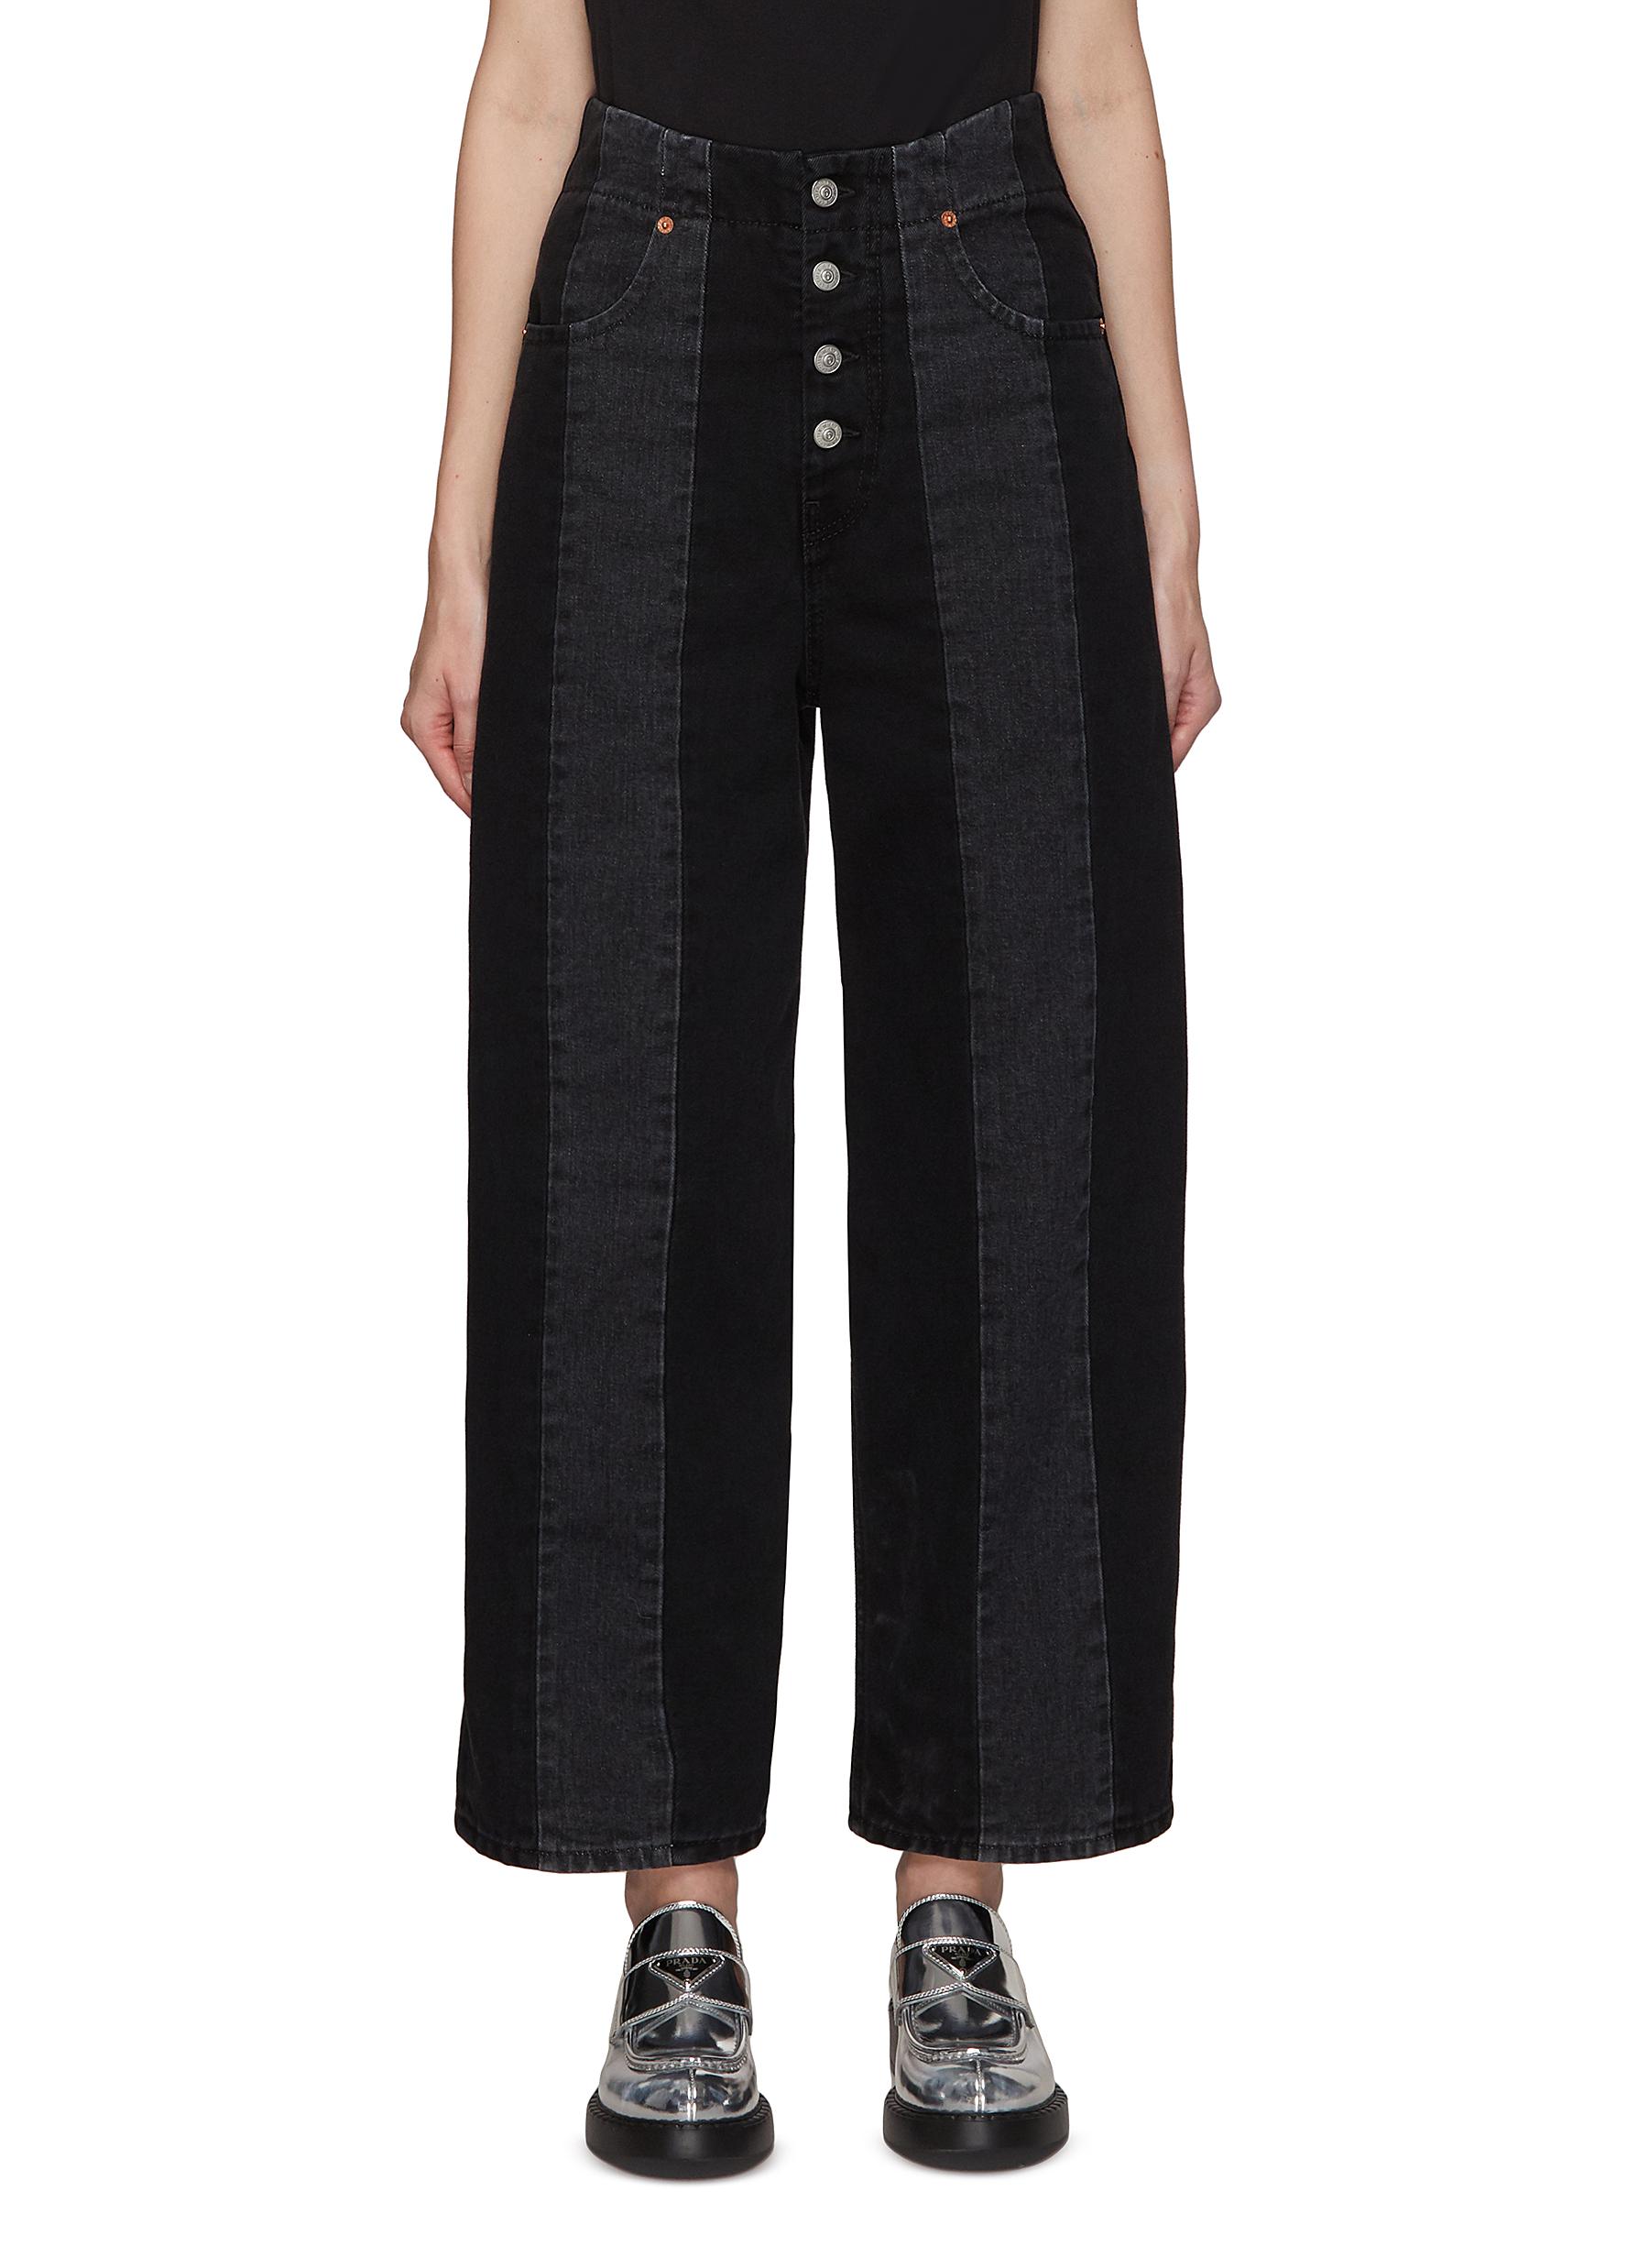 MM6 MAISON MARGIELA EXPOSED BUTTON FLY CONTRAST PANEL HIGH RISE WIDE LEG JEANS